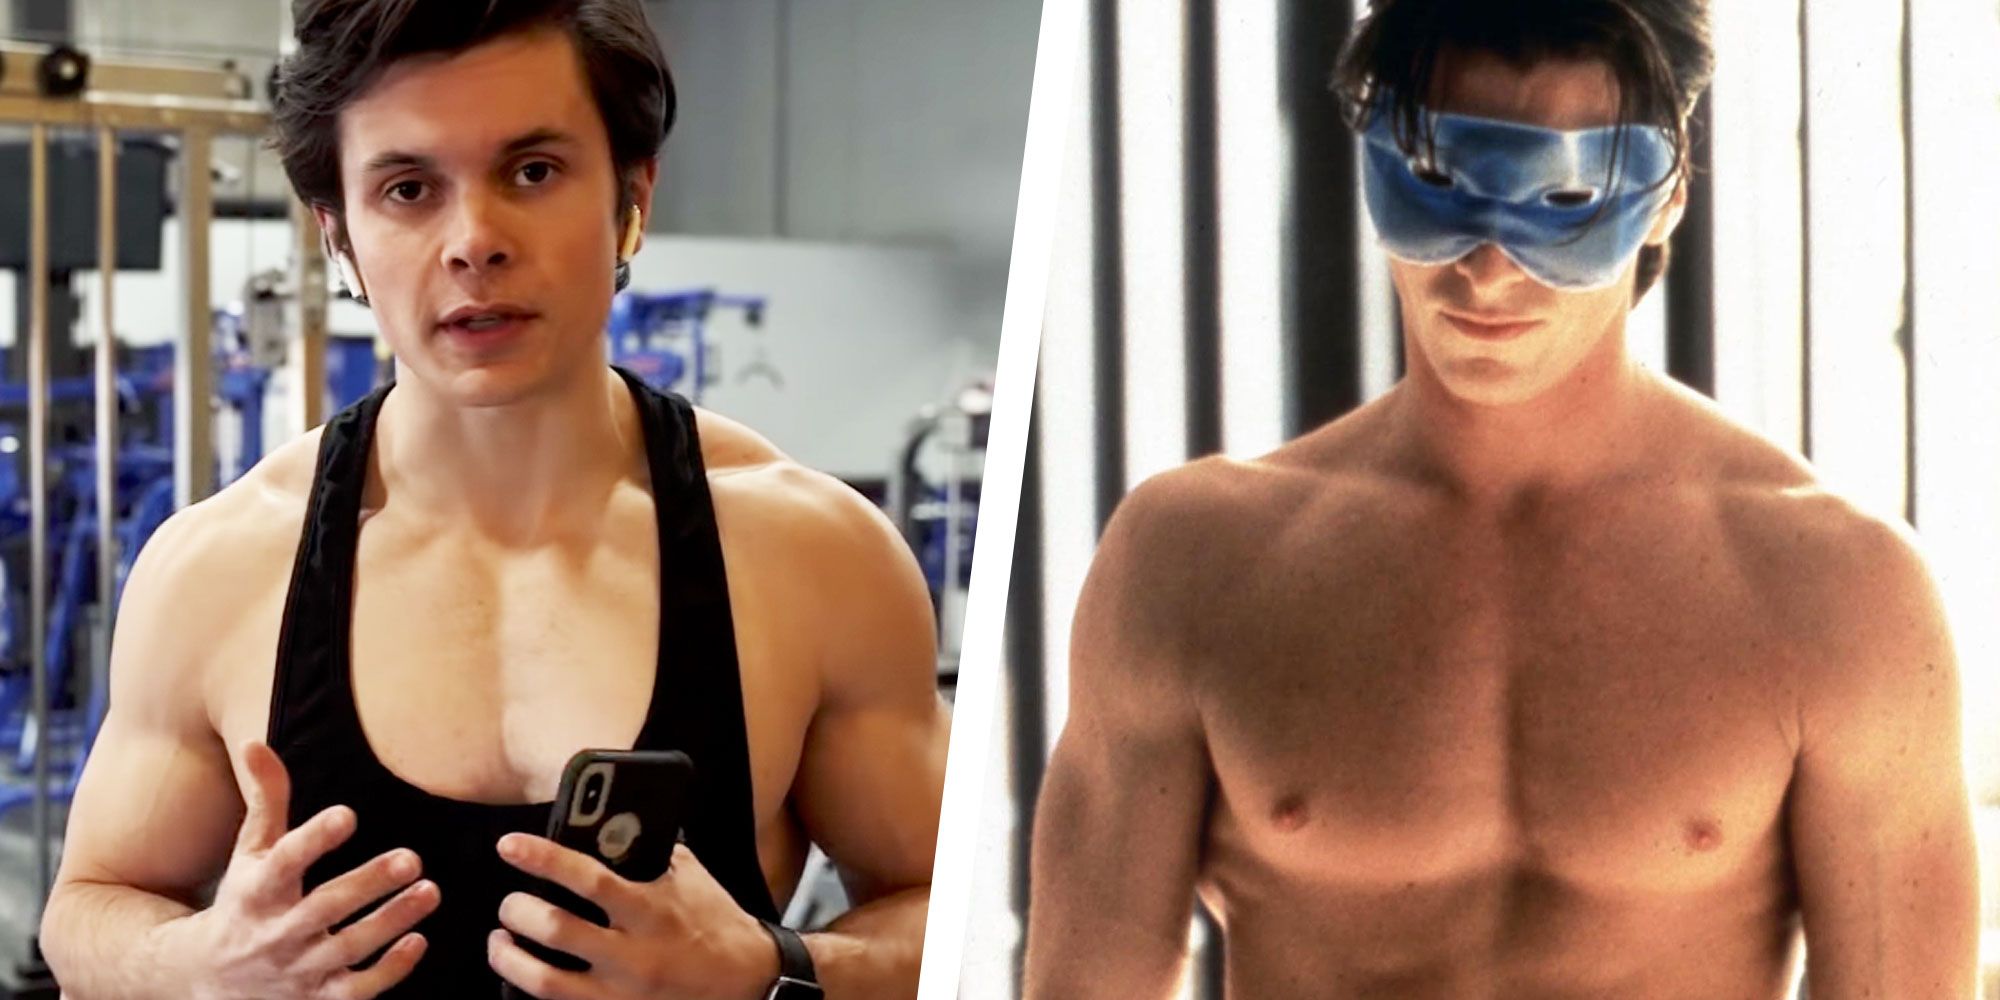 Man Tries Christian Bale's 'American Psycho' Workout YouTube...